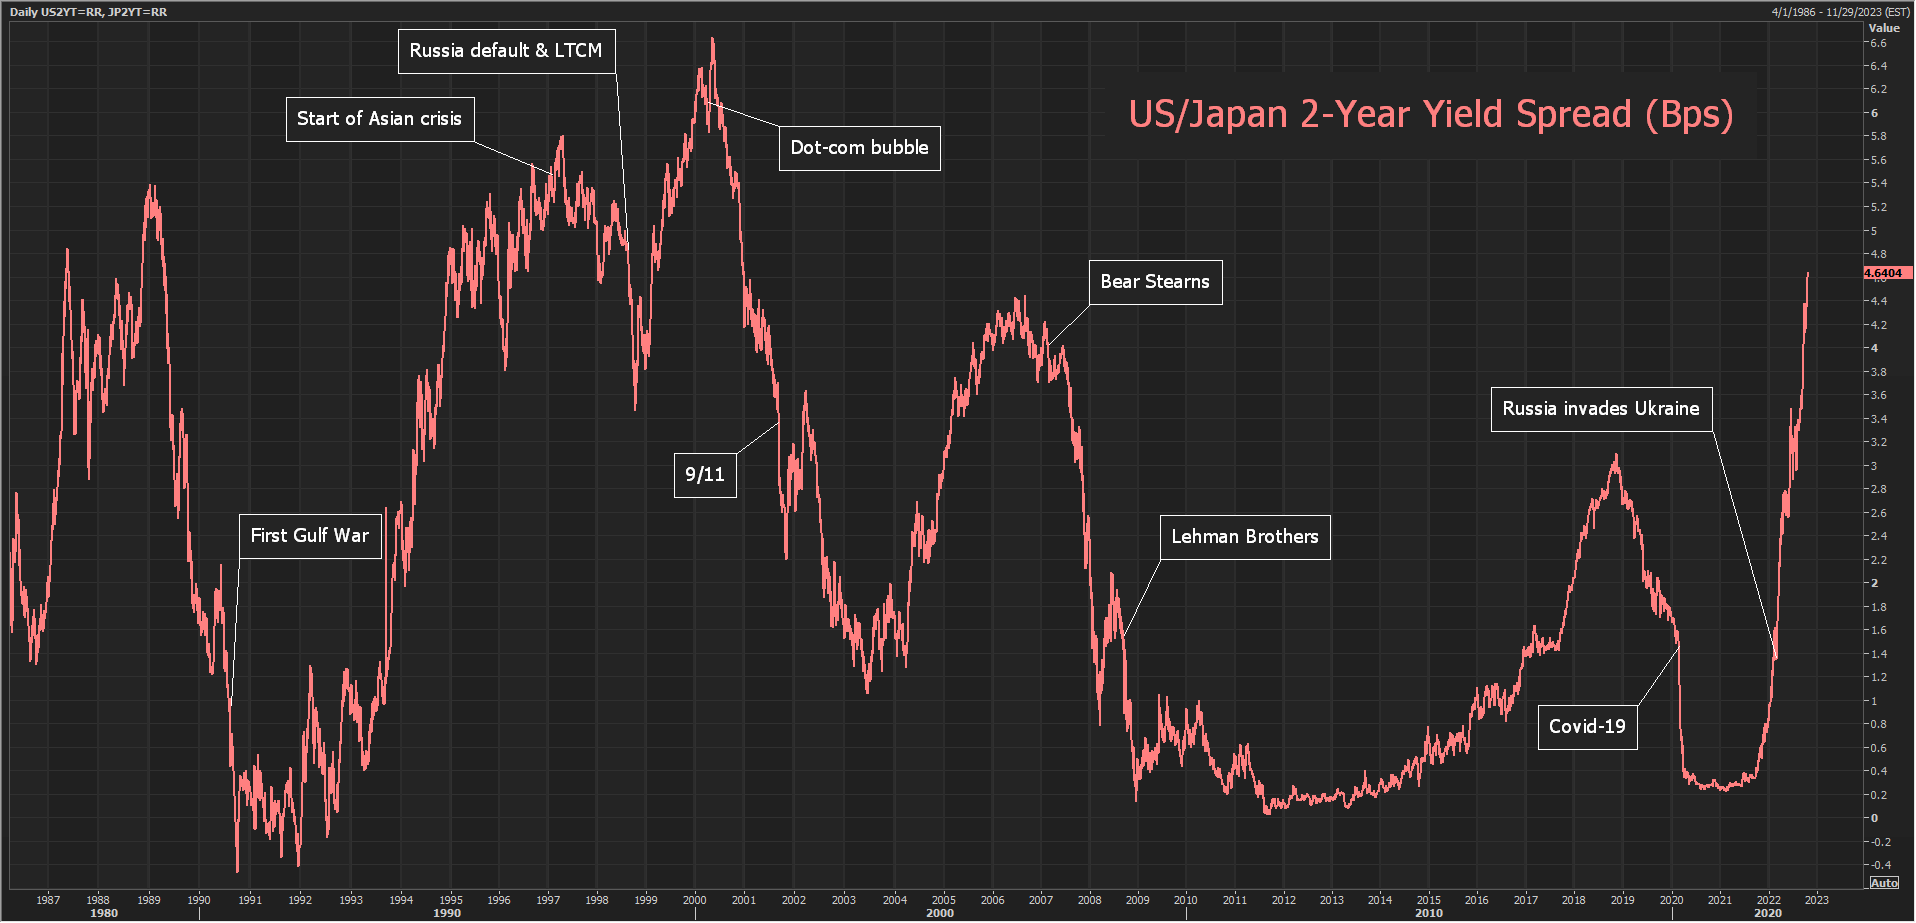 US-Japanese 2-year yield spread history